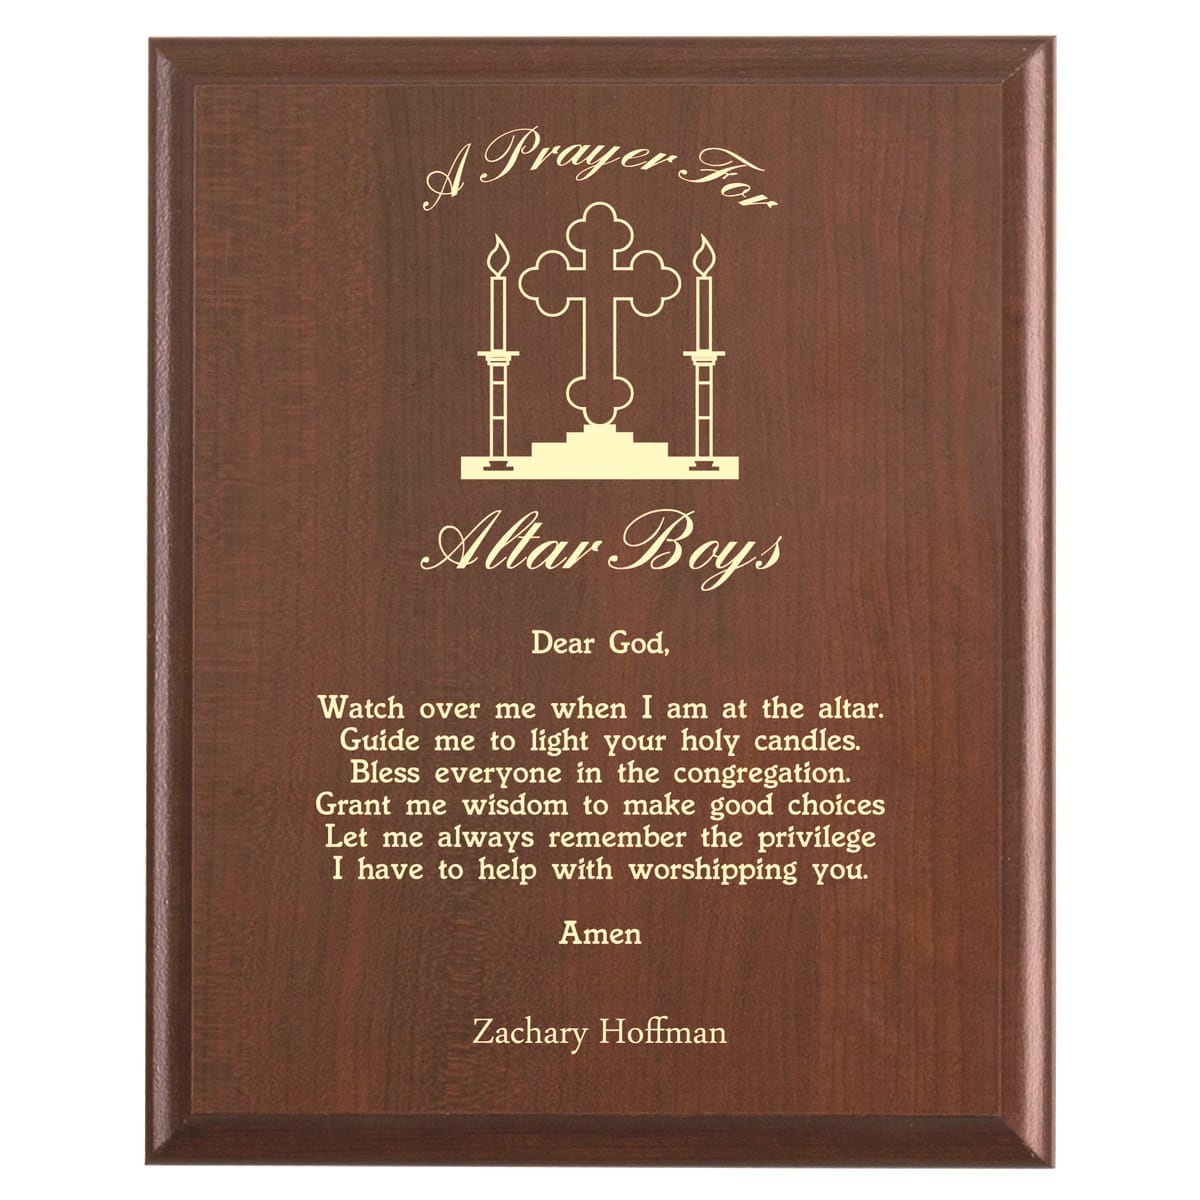 Plaque photo: Altar Boy Prayer Plaque design with free personalization. Wood style finish with customized text.